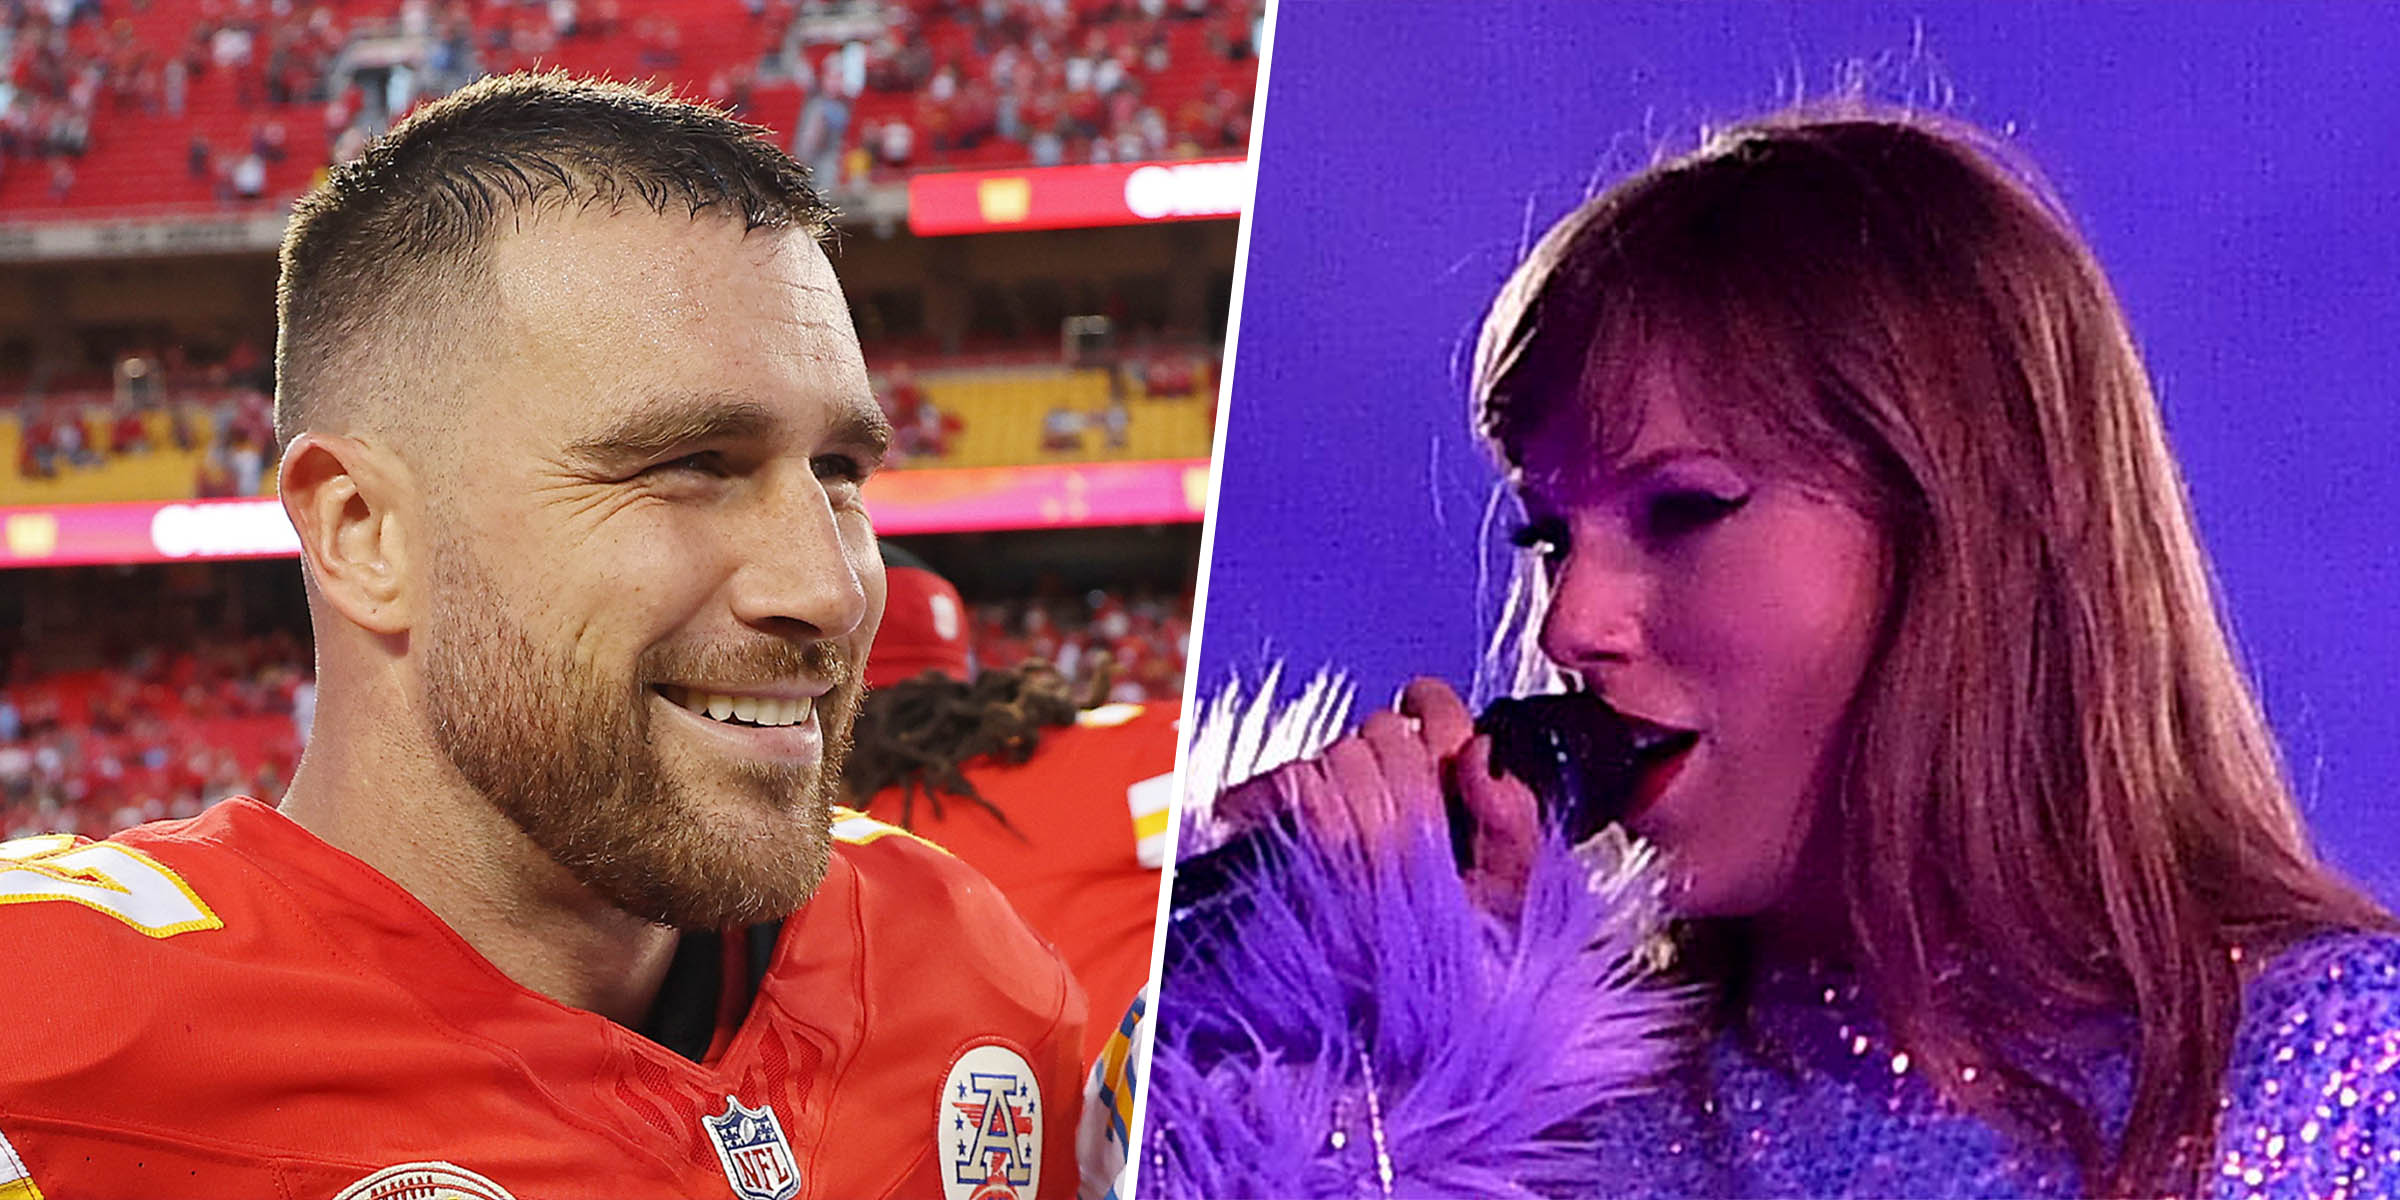 "Whether we win or lose, my love for you will endure forever." Taylor Swift sends a comforting message to Travis Kelce after the Chiefs' loss.